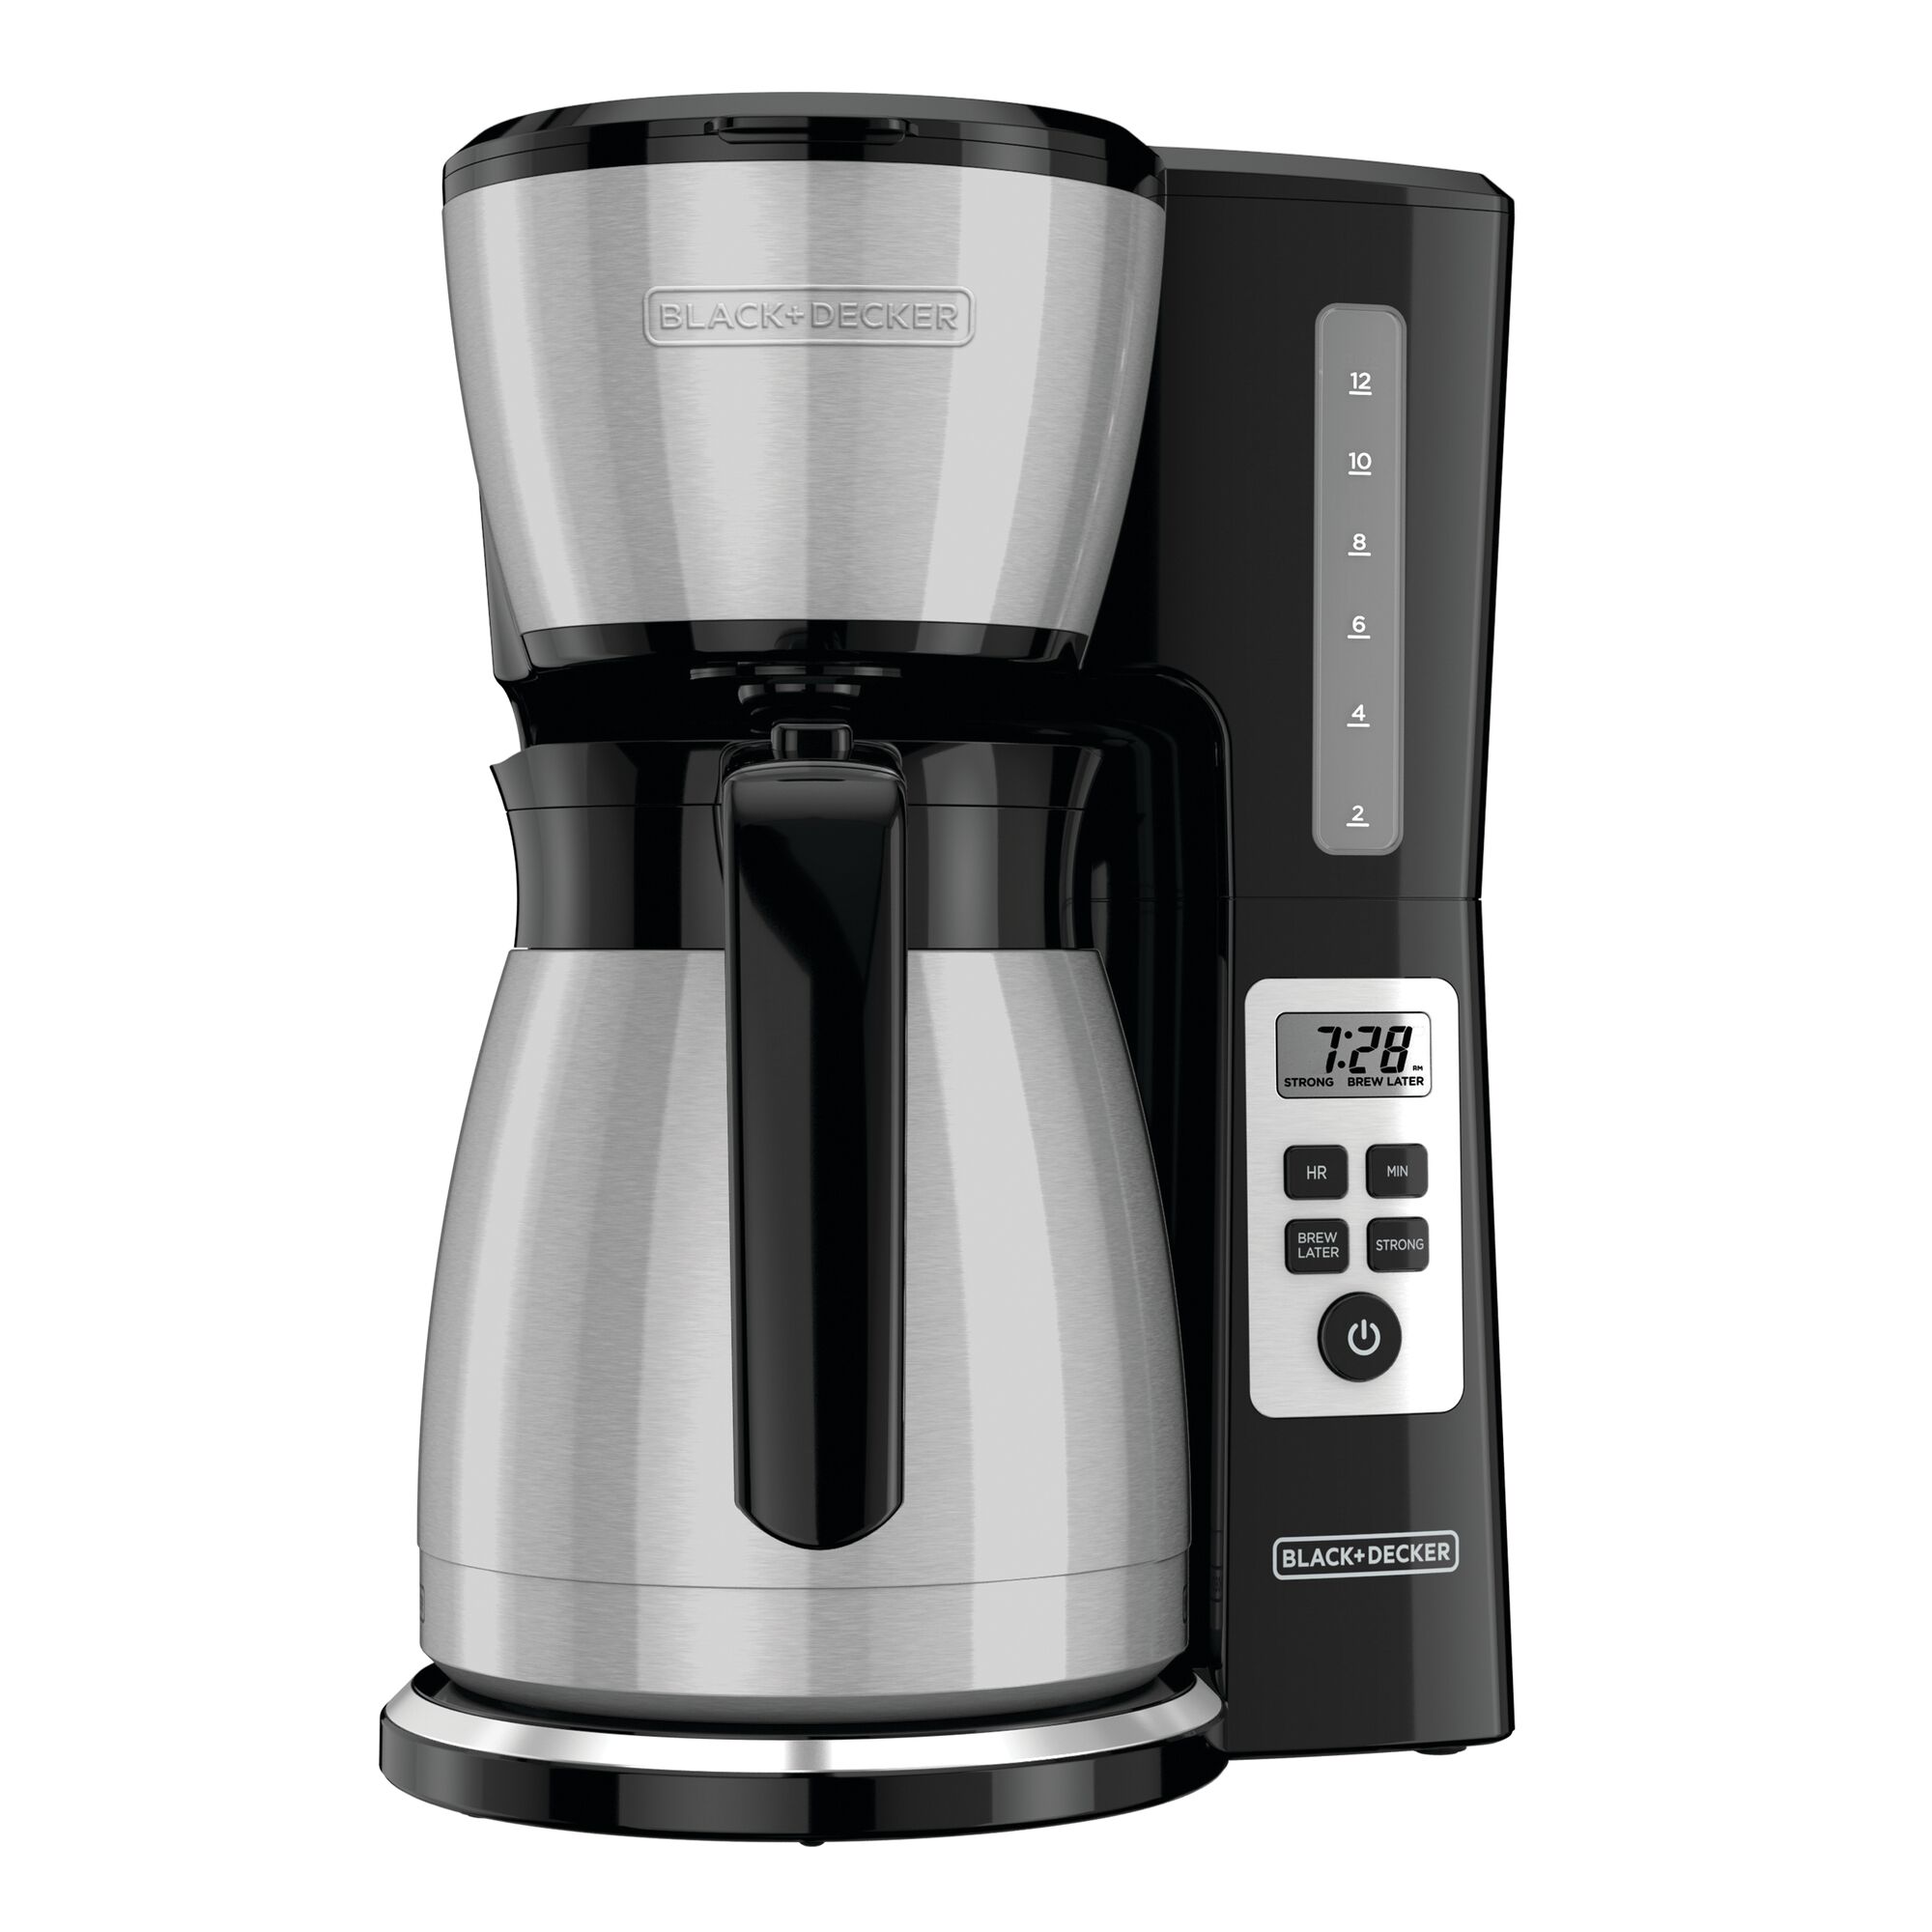 12 Cup Thermal Programmable Coffee maker.